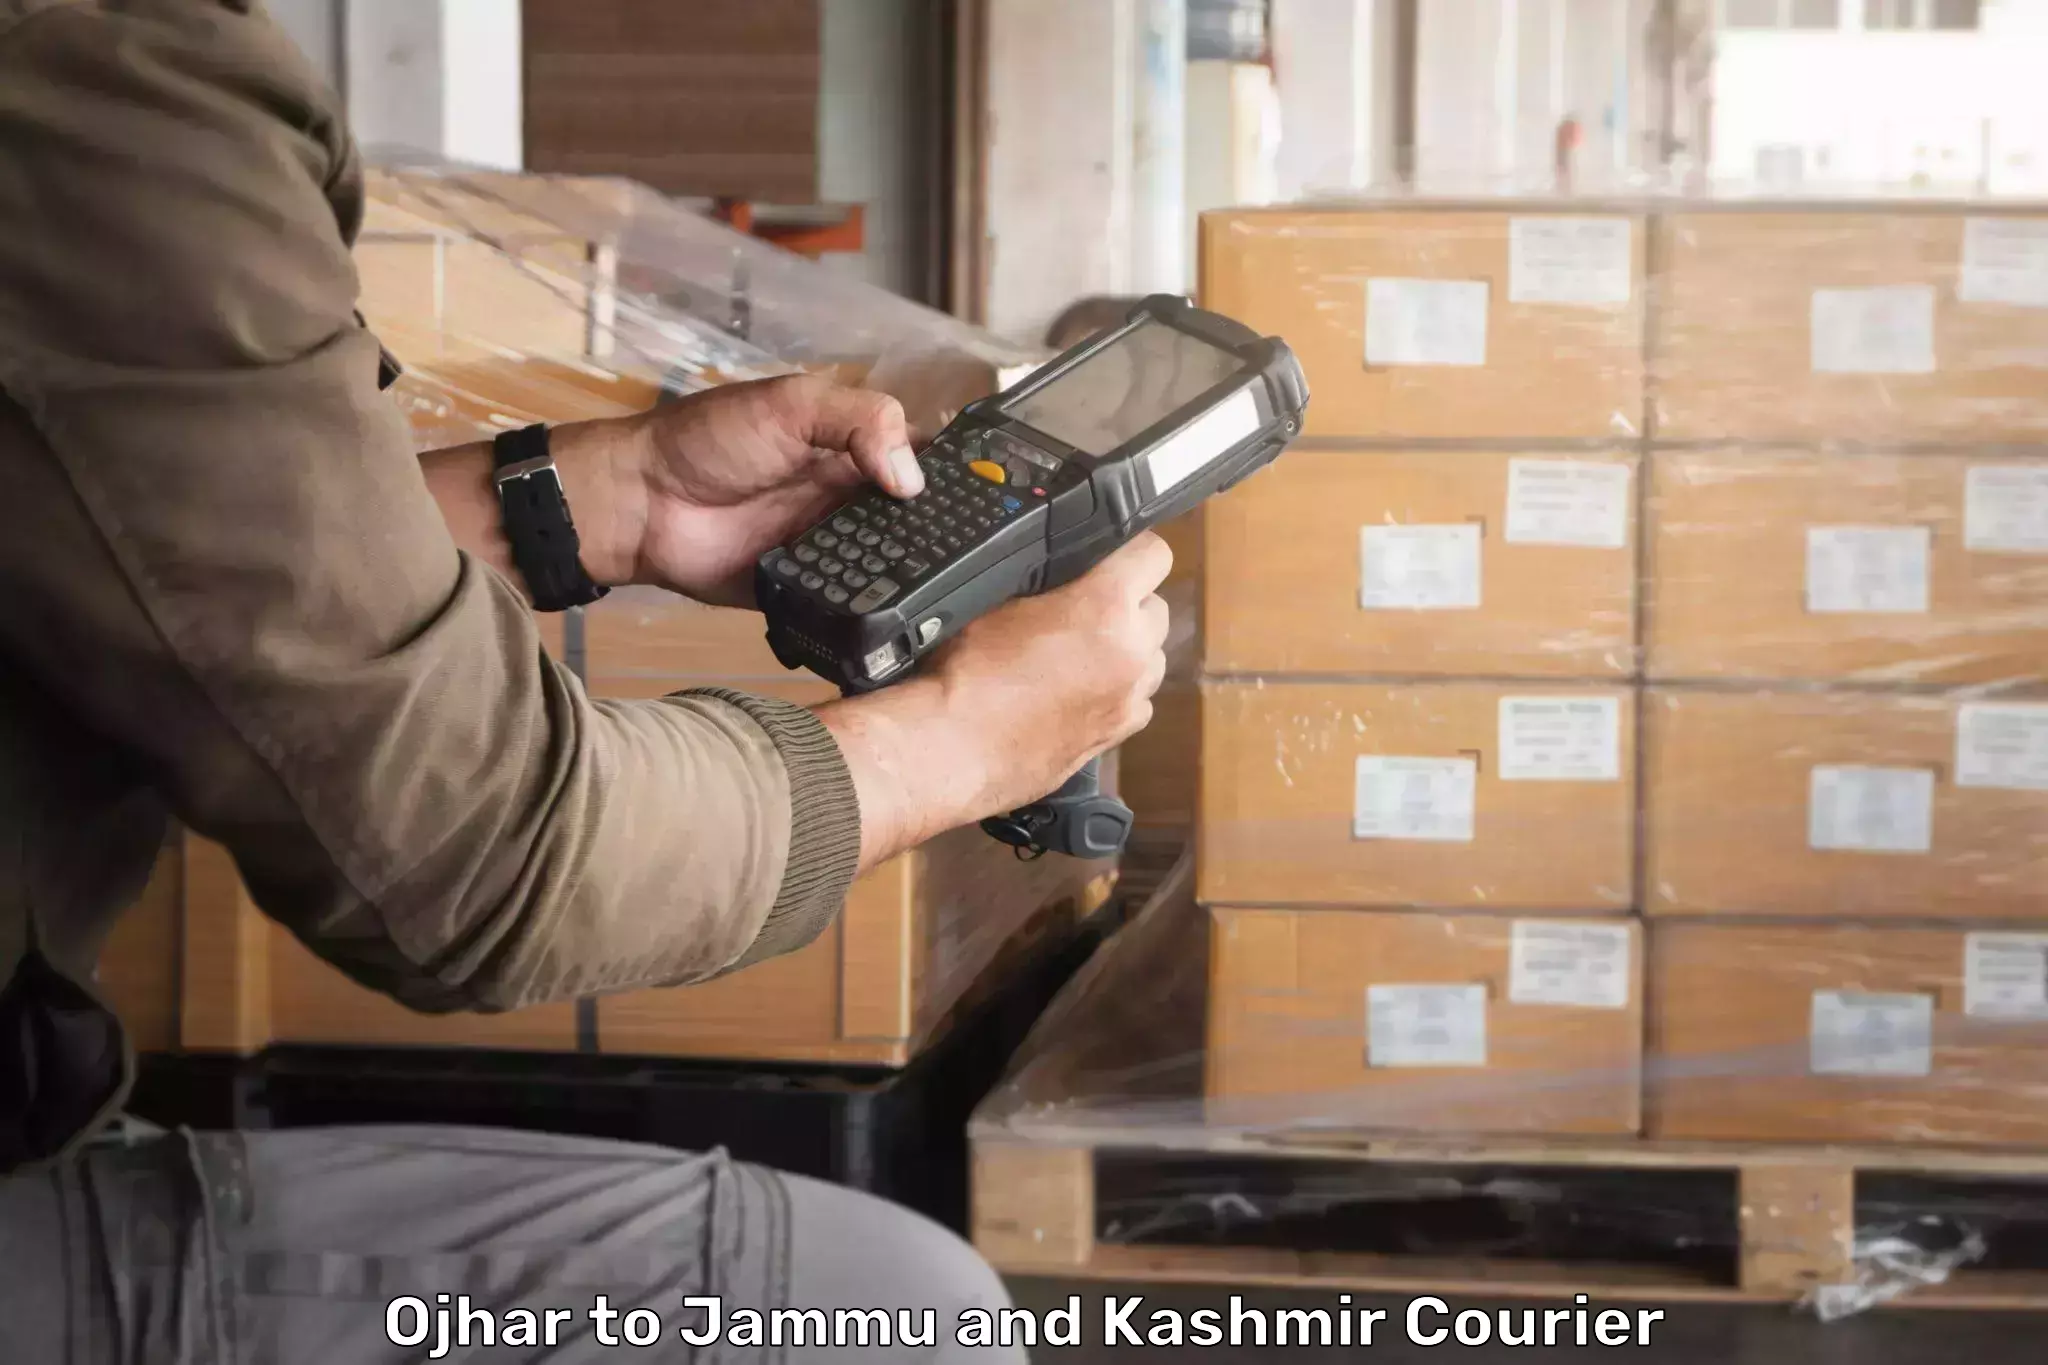 Personal courier services Ojhar to Jammu and Kashmir